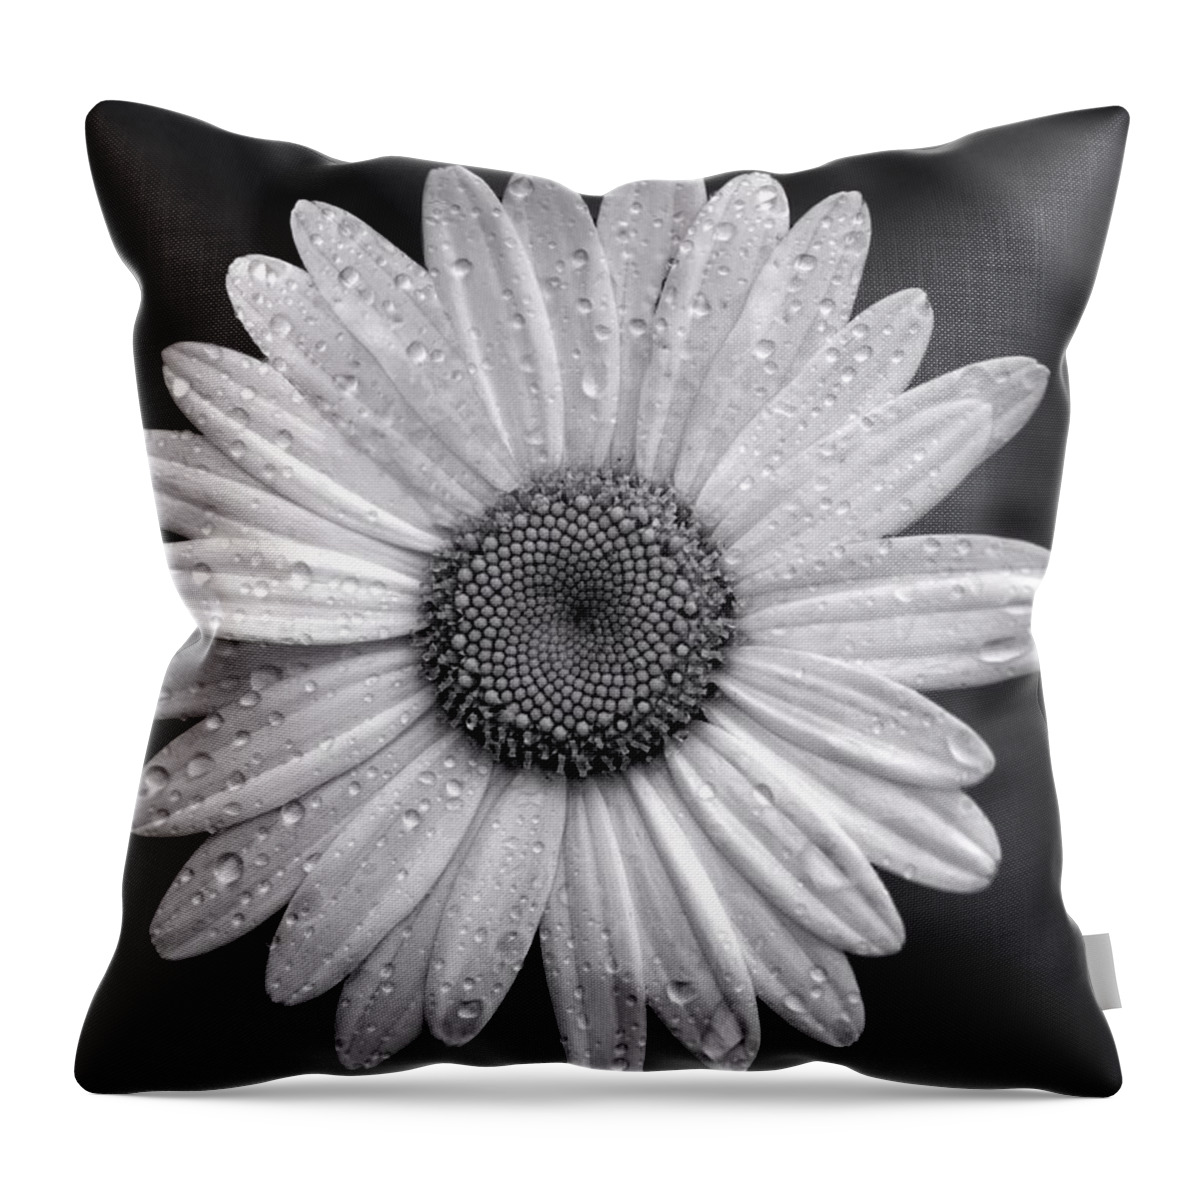 Raindrops Throw Pillow featuring the photograph Raindrops by Jackson Pearson